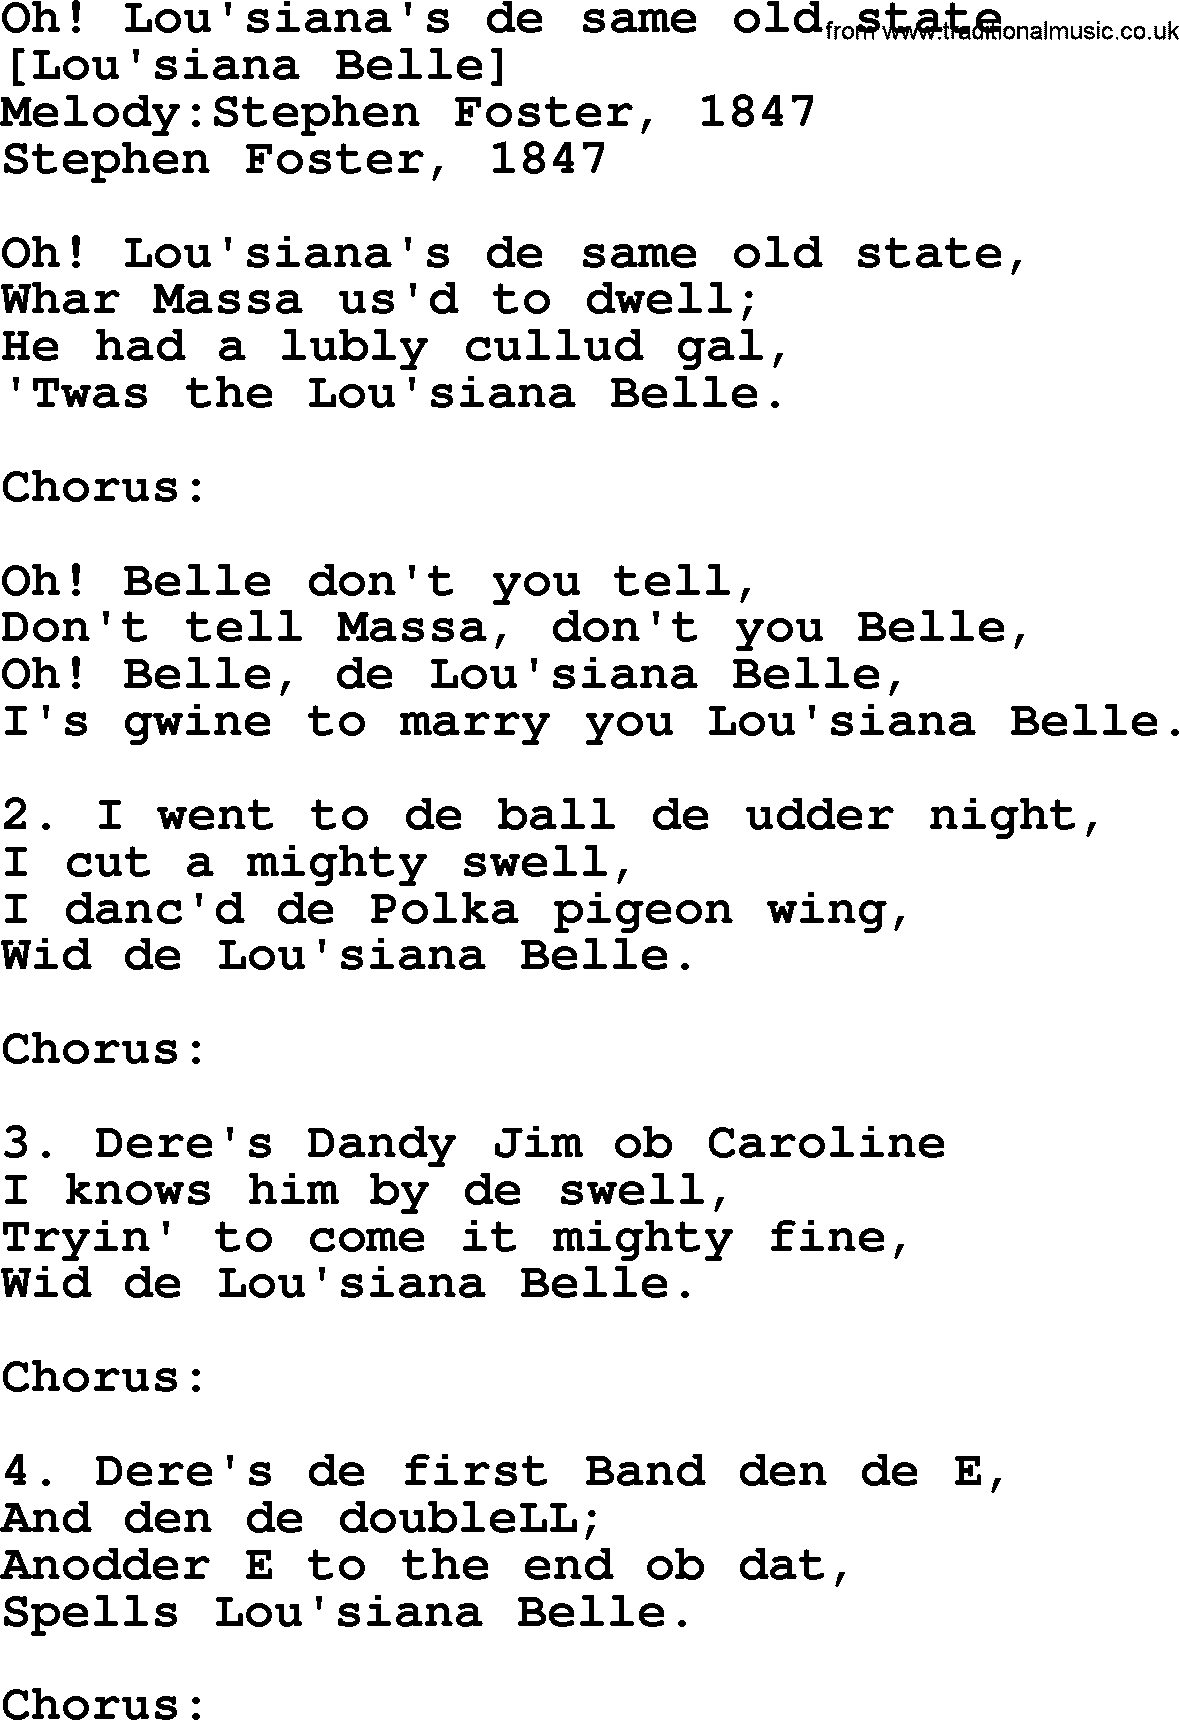 Old American Song: Oh! Lou'siana's De Same Old State, lyrics